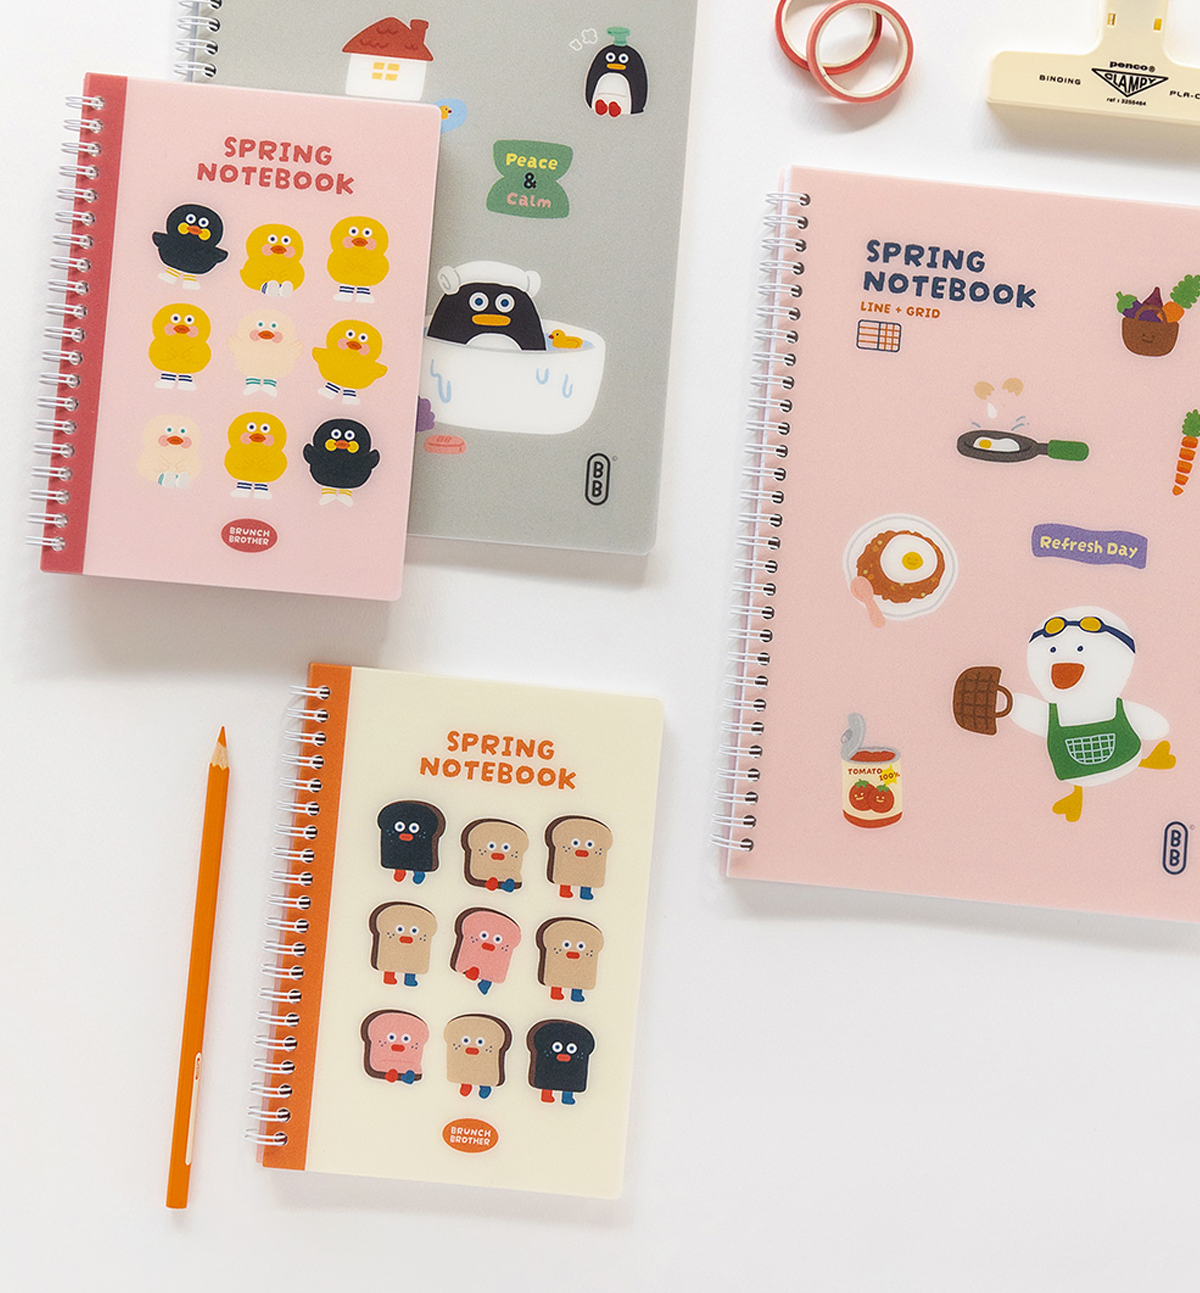 B6 Brunch Brother Line & Blank Ring Notebook